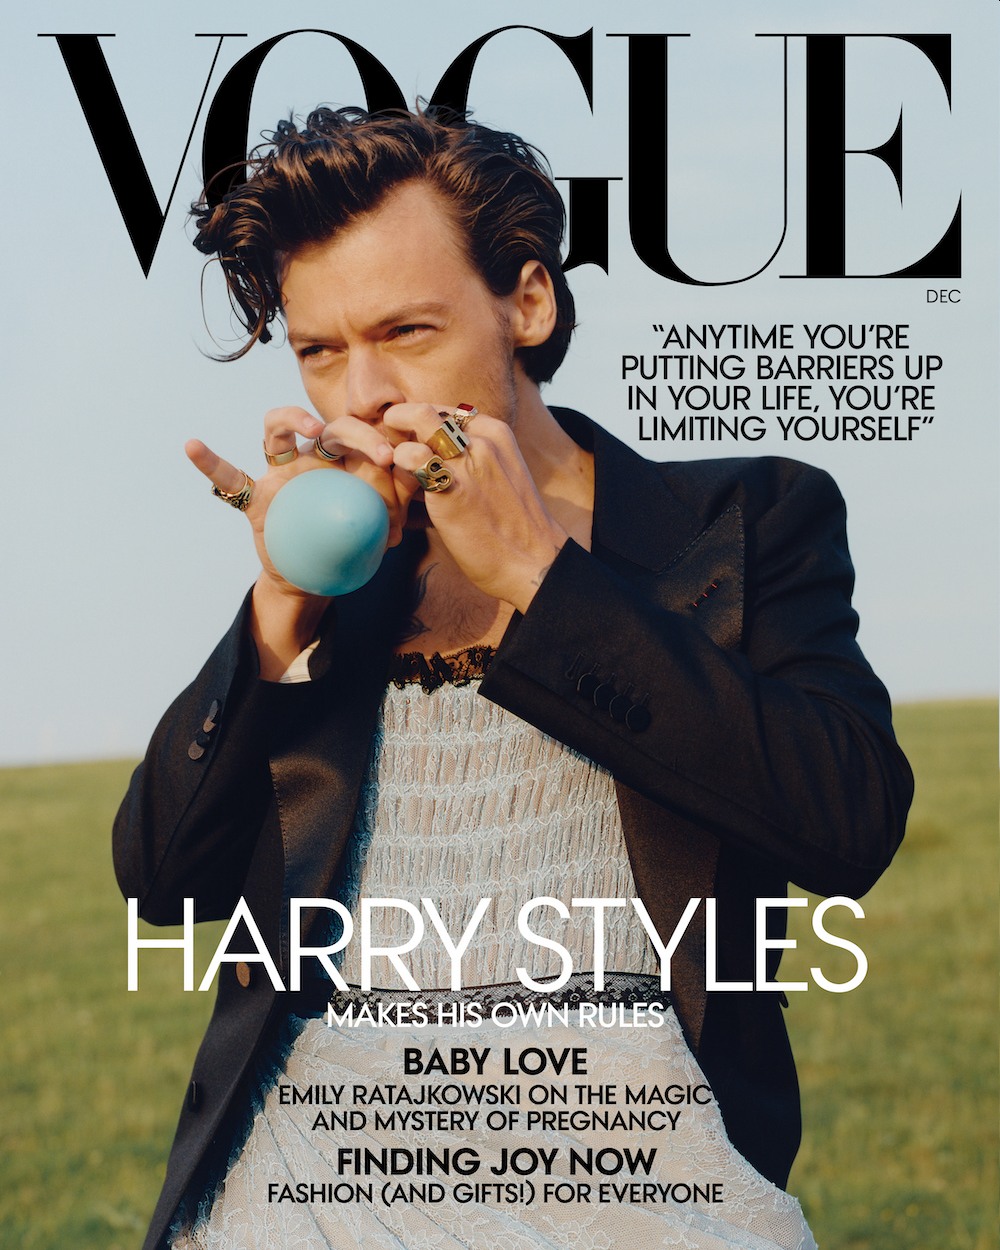 Harry Styles covers Vogue